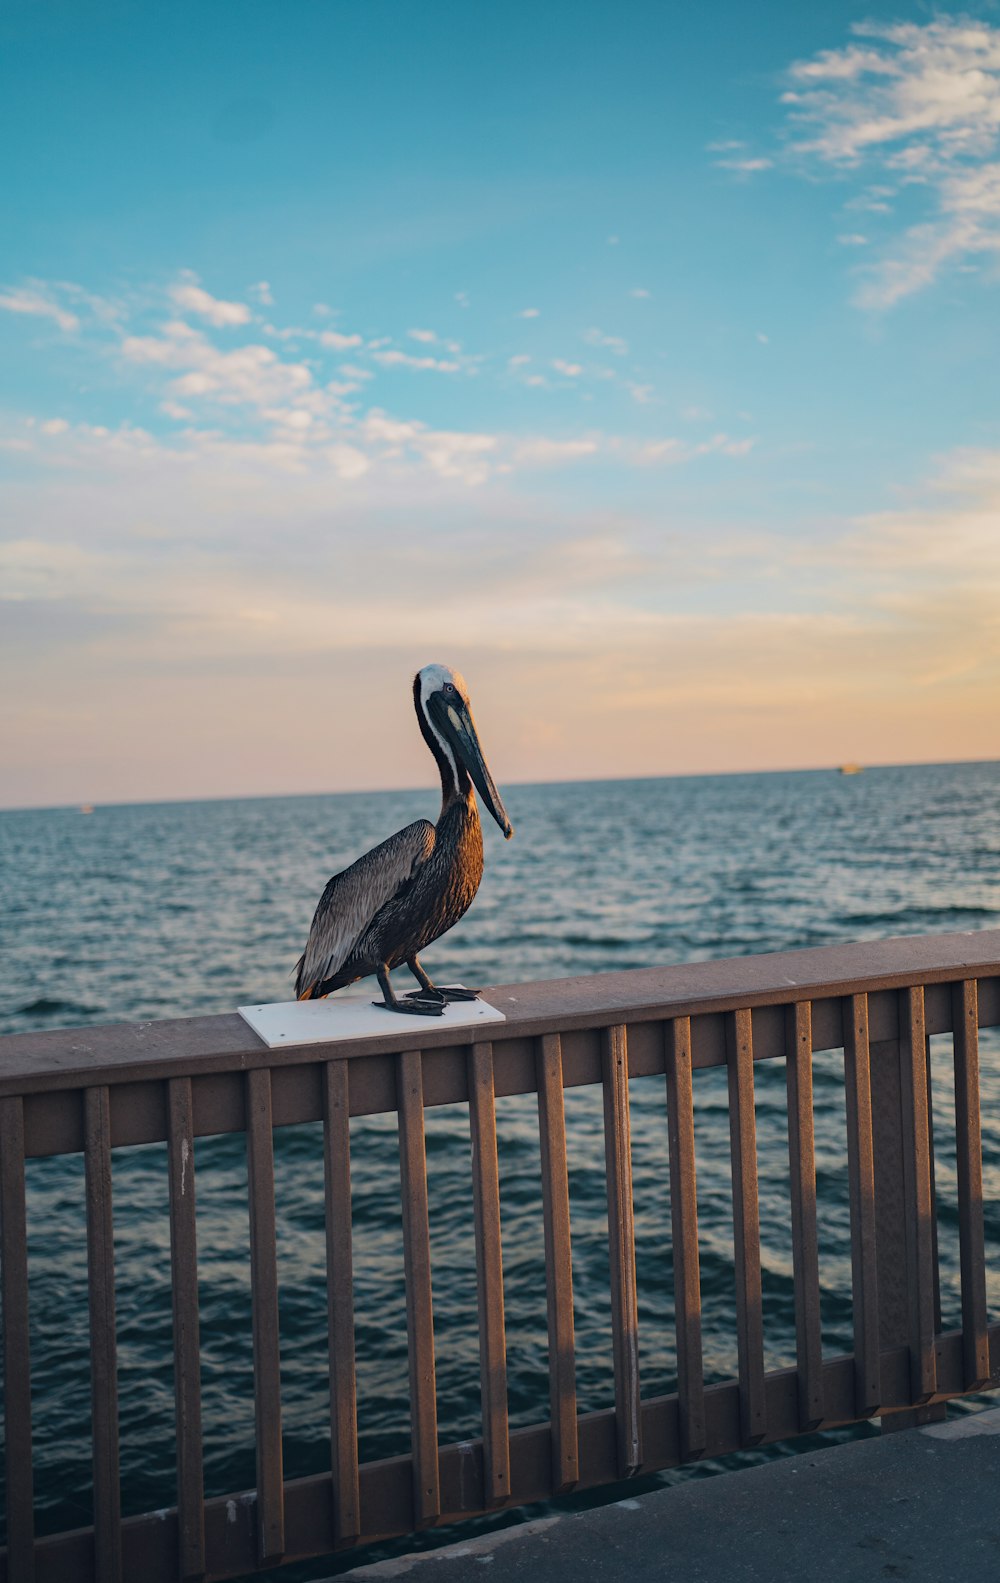 a pelican sitting on a railing overlooking the ocean